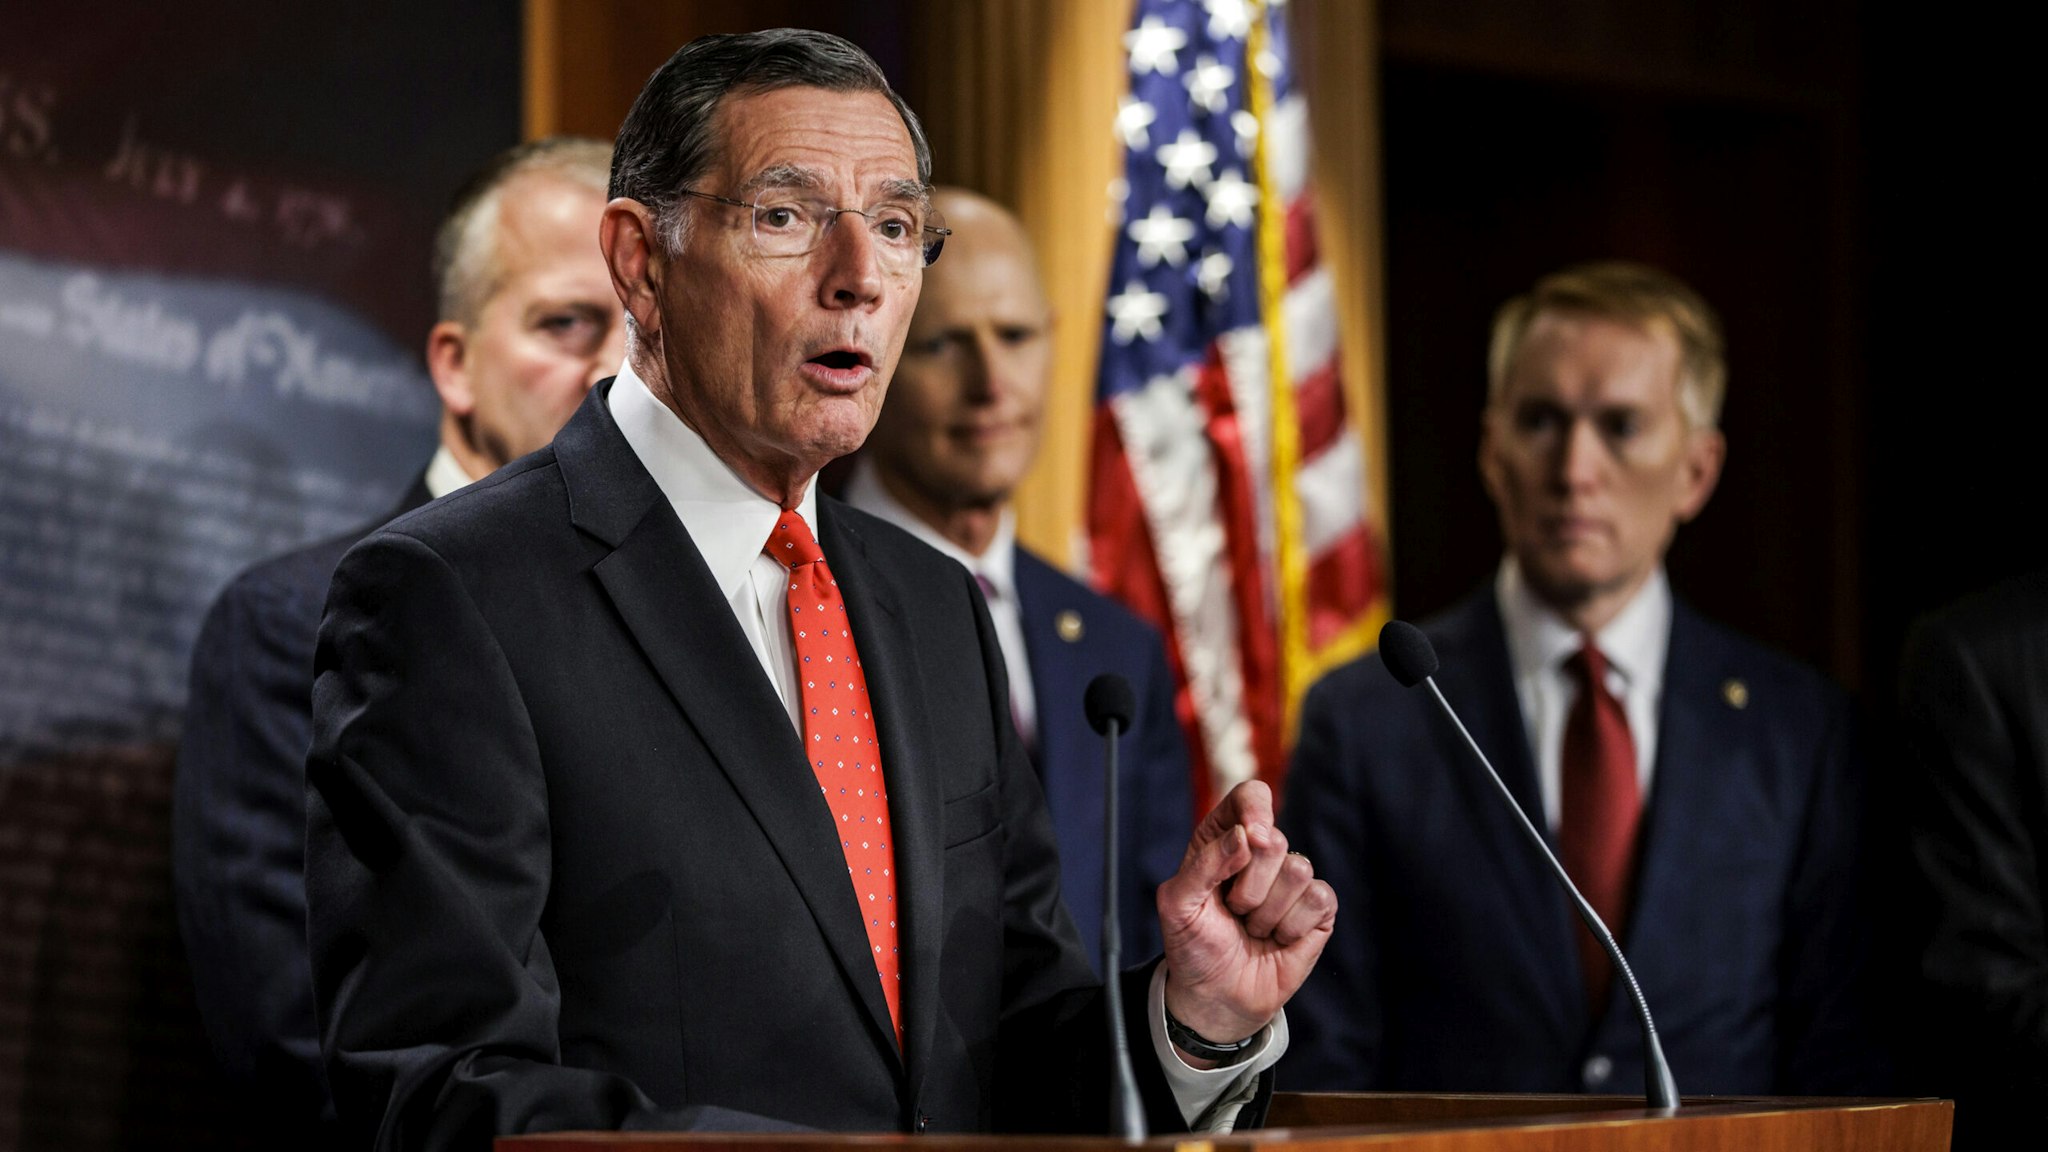 WASHINGTON, DC - OCTOBER 27: Sen. John Barrasso (R-WY) speaks alongside other Republican Senators during a press conference on rising gas an energy prices at the U.S. Capitol on October 27, 2021 in Washington, DC. Republicans are placing blame on the Biden Administration for the quickly rising gas prices this year as predictions estimate that heating costs this winter will rise significantly as well.